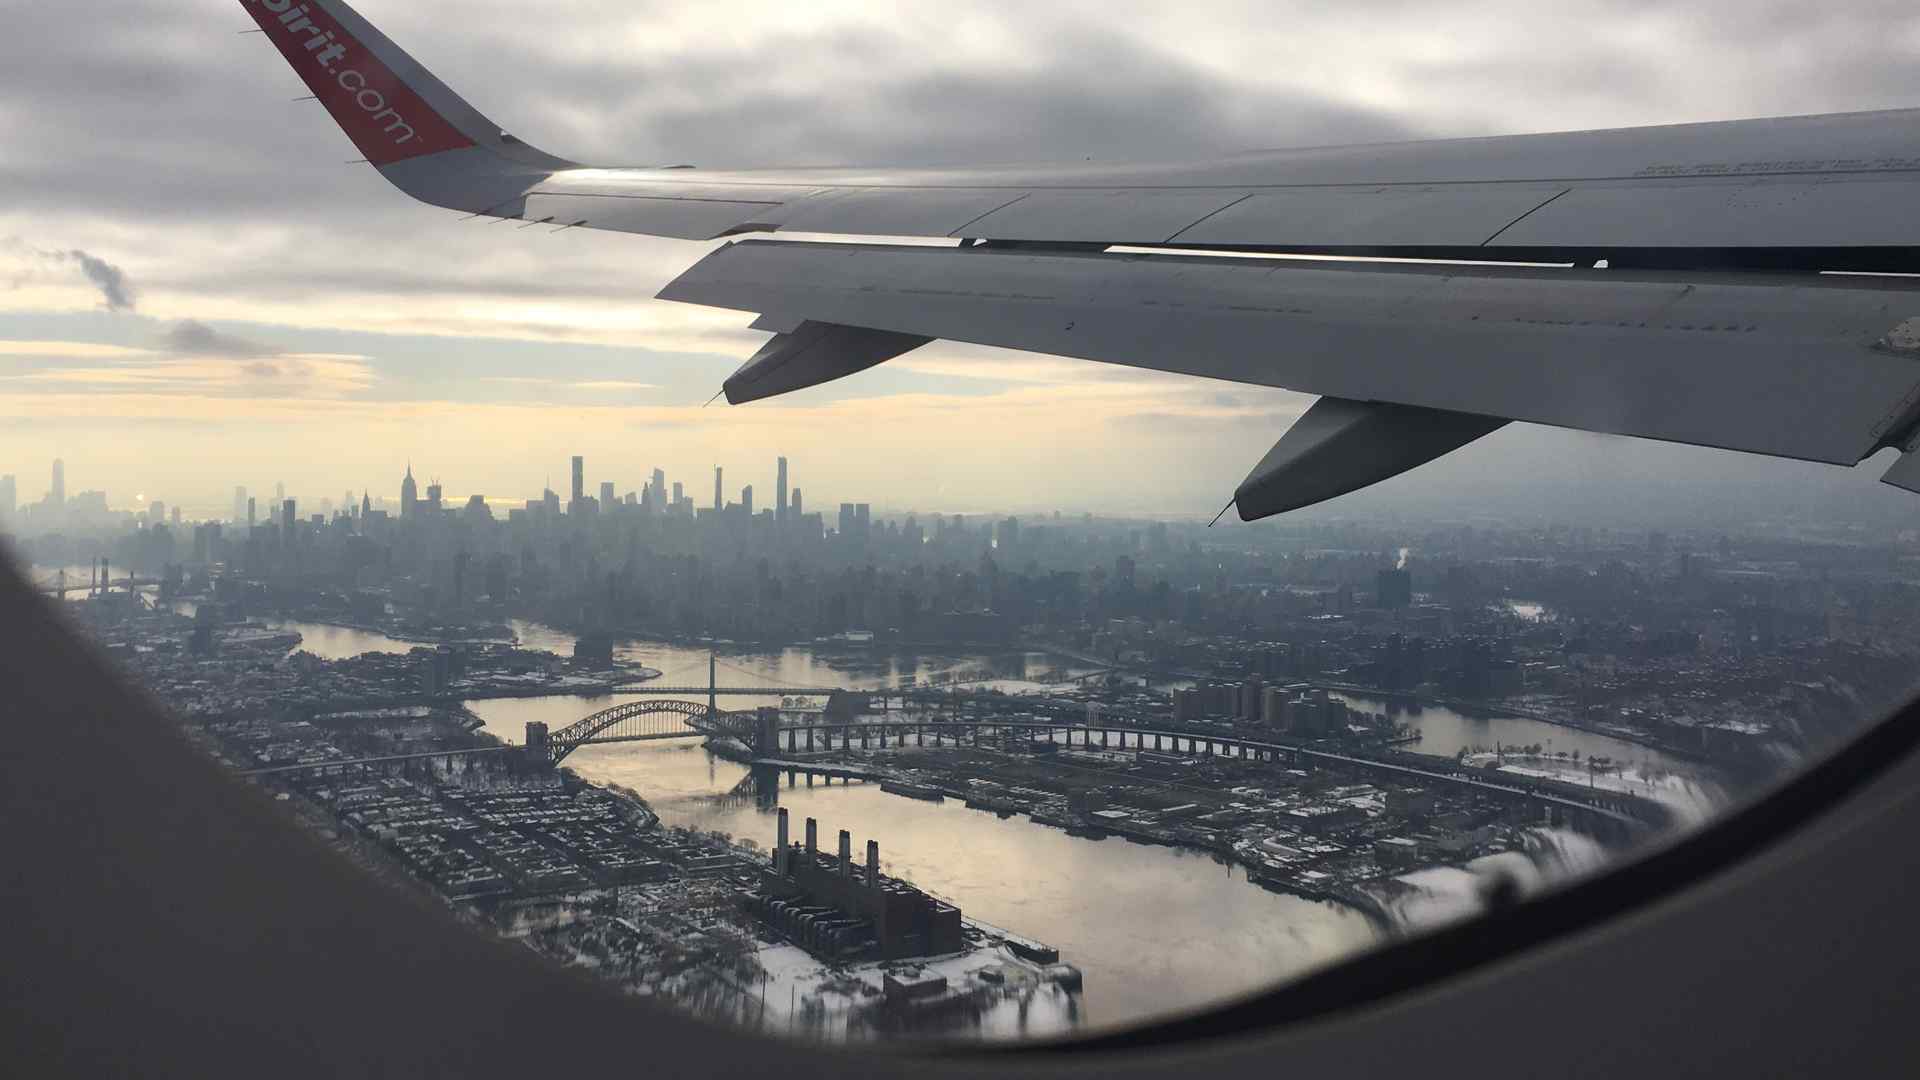 A view of New York from an airplane window